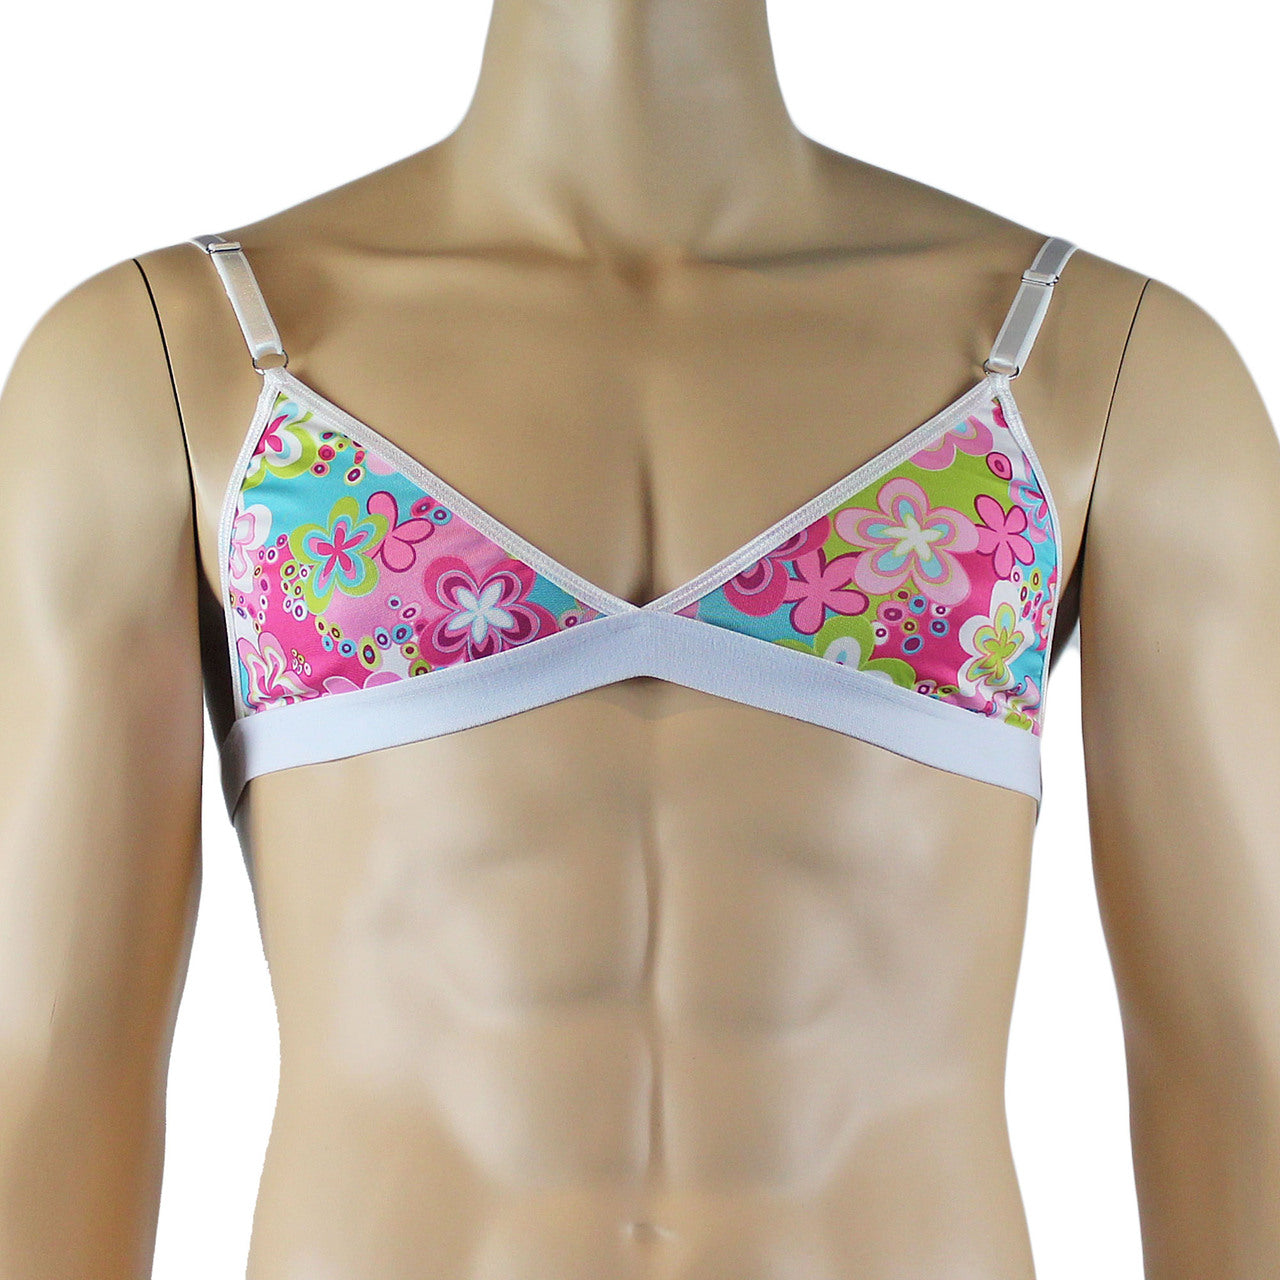 Male Hippie Flower Print Bra Top with Band